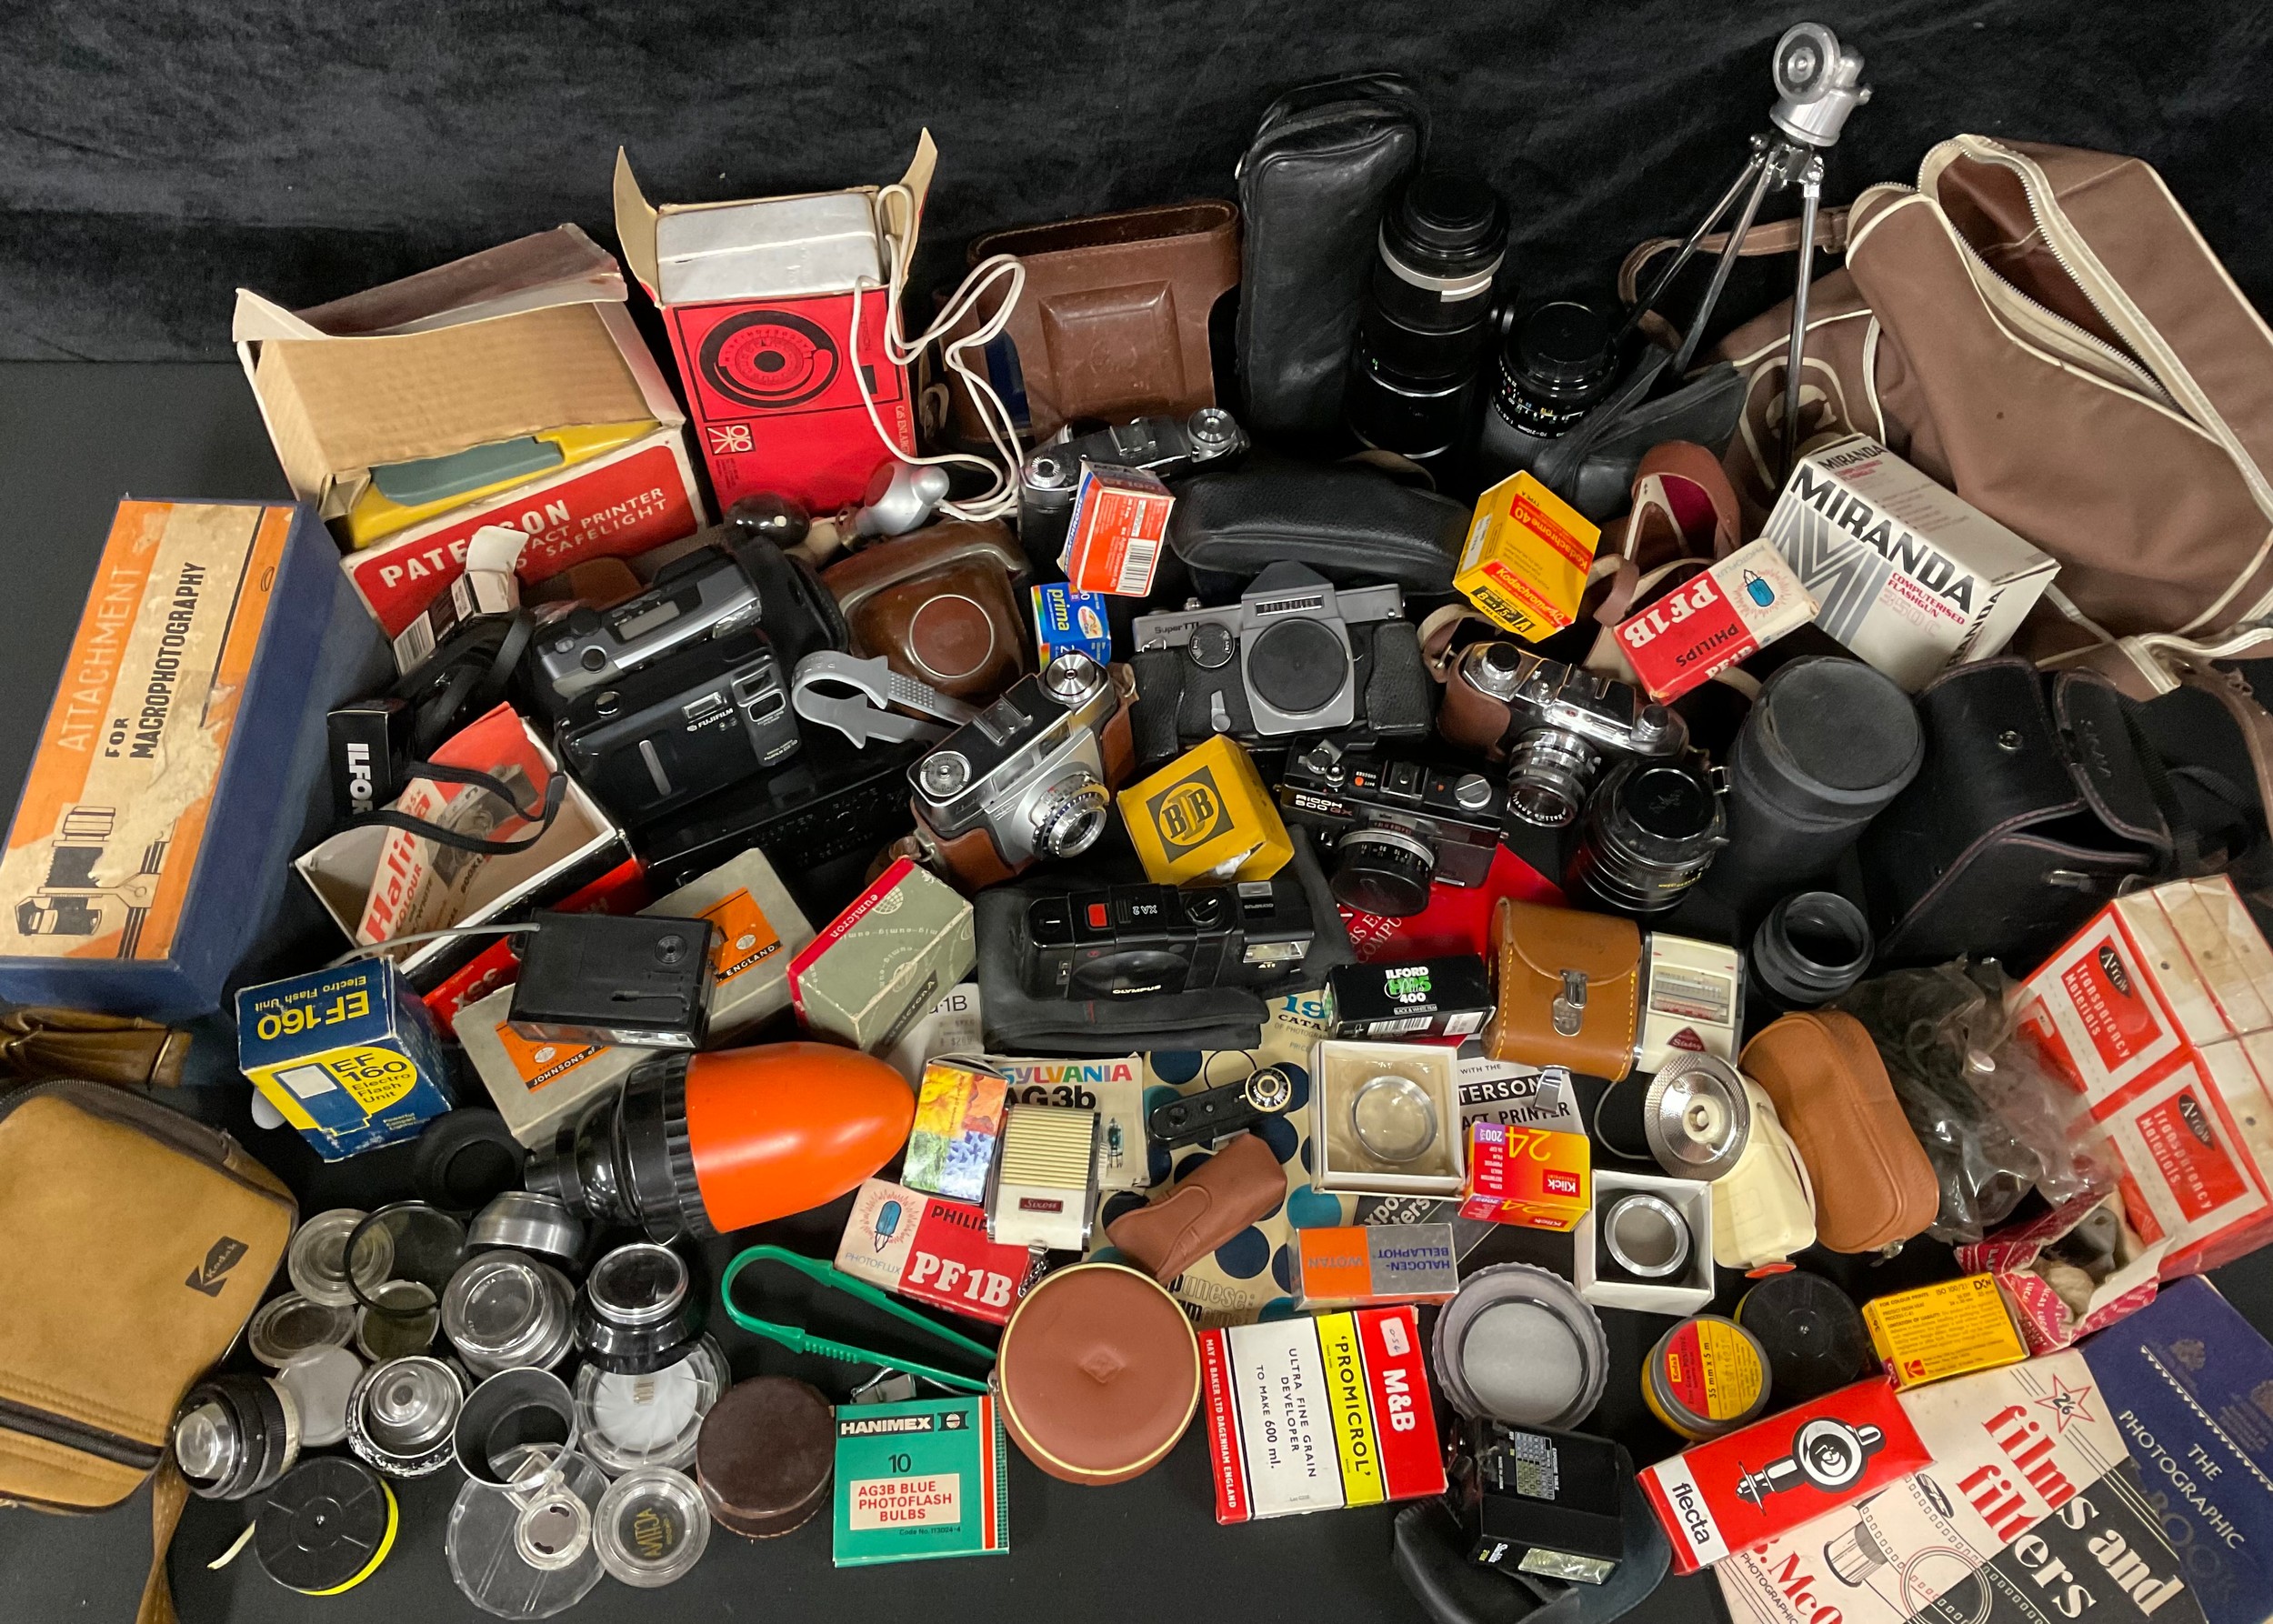 Cameras - assorted 35mm cameras, lenses and accessories; macro attachment, light meters, etc, c. - Image 2 of 2